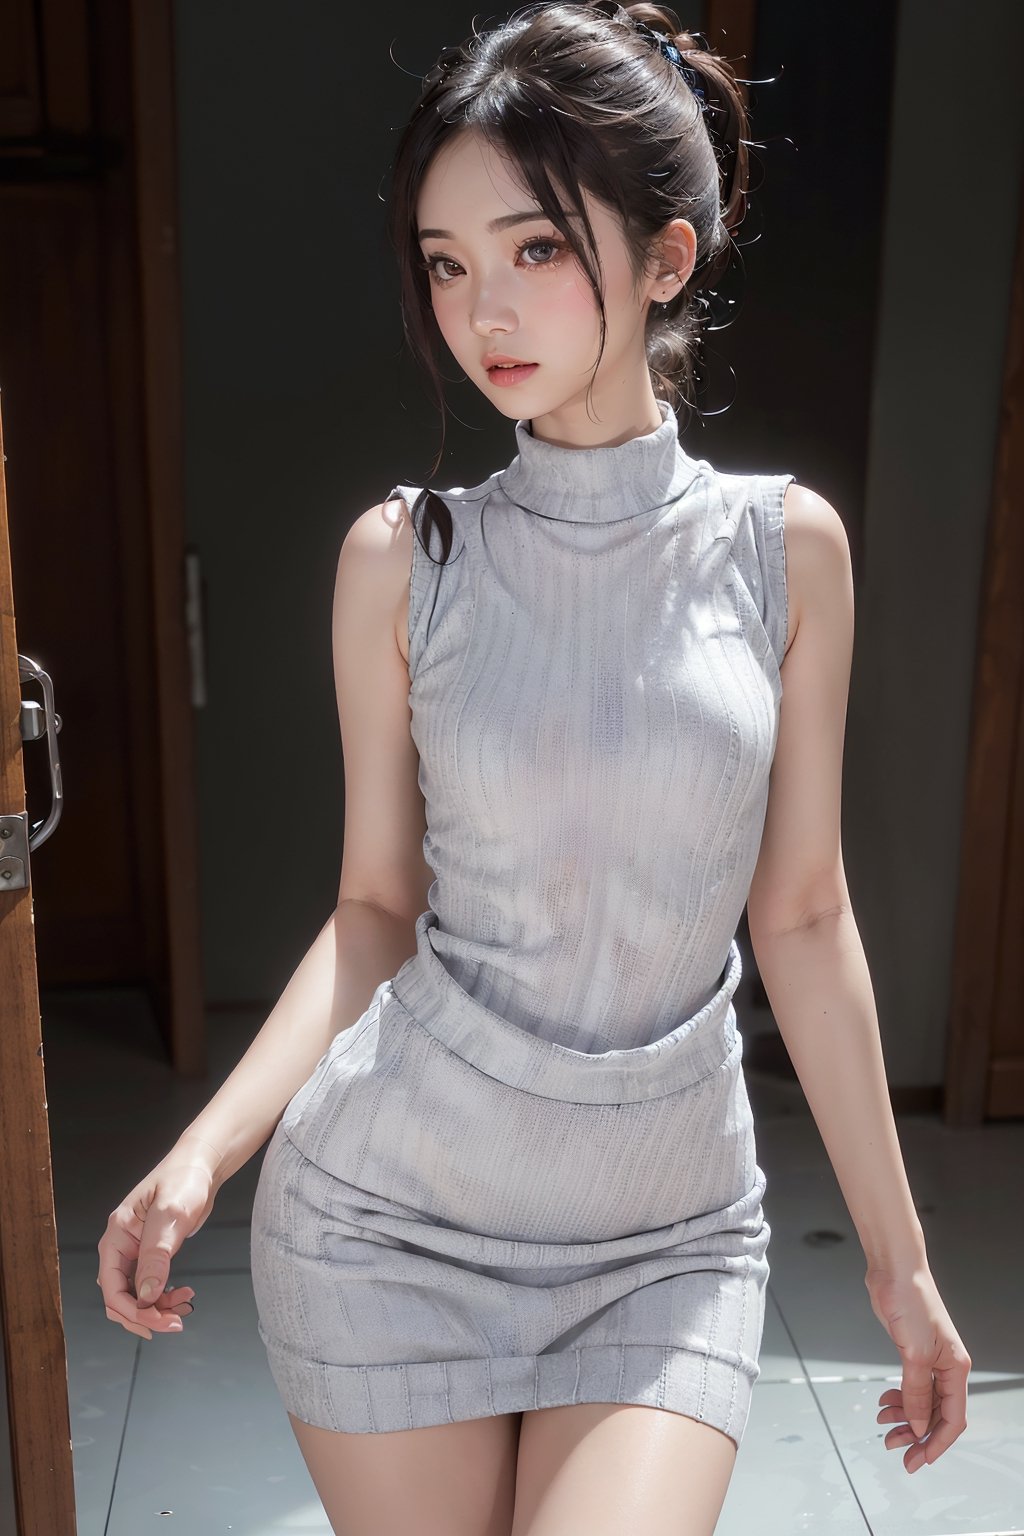 raw photo,ultra detailed, 1girl,18years old, asian,pale skin ,(photo realistic:1.4), (perfect body:1.3), (upper body:1.3), (sleeveless slim fitted sweater dress:1.4) , (narrow waist:1.4), (slim thighs:1.5), (crying:0.9),(smudged mascara) (wash room),(depth of field),(look down from the side)